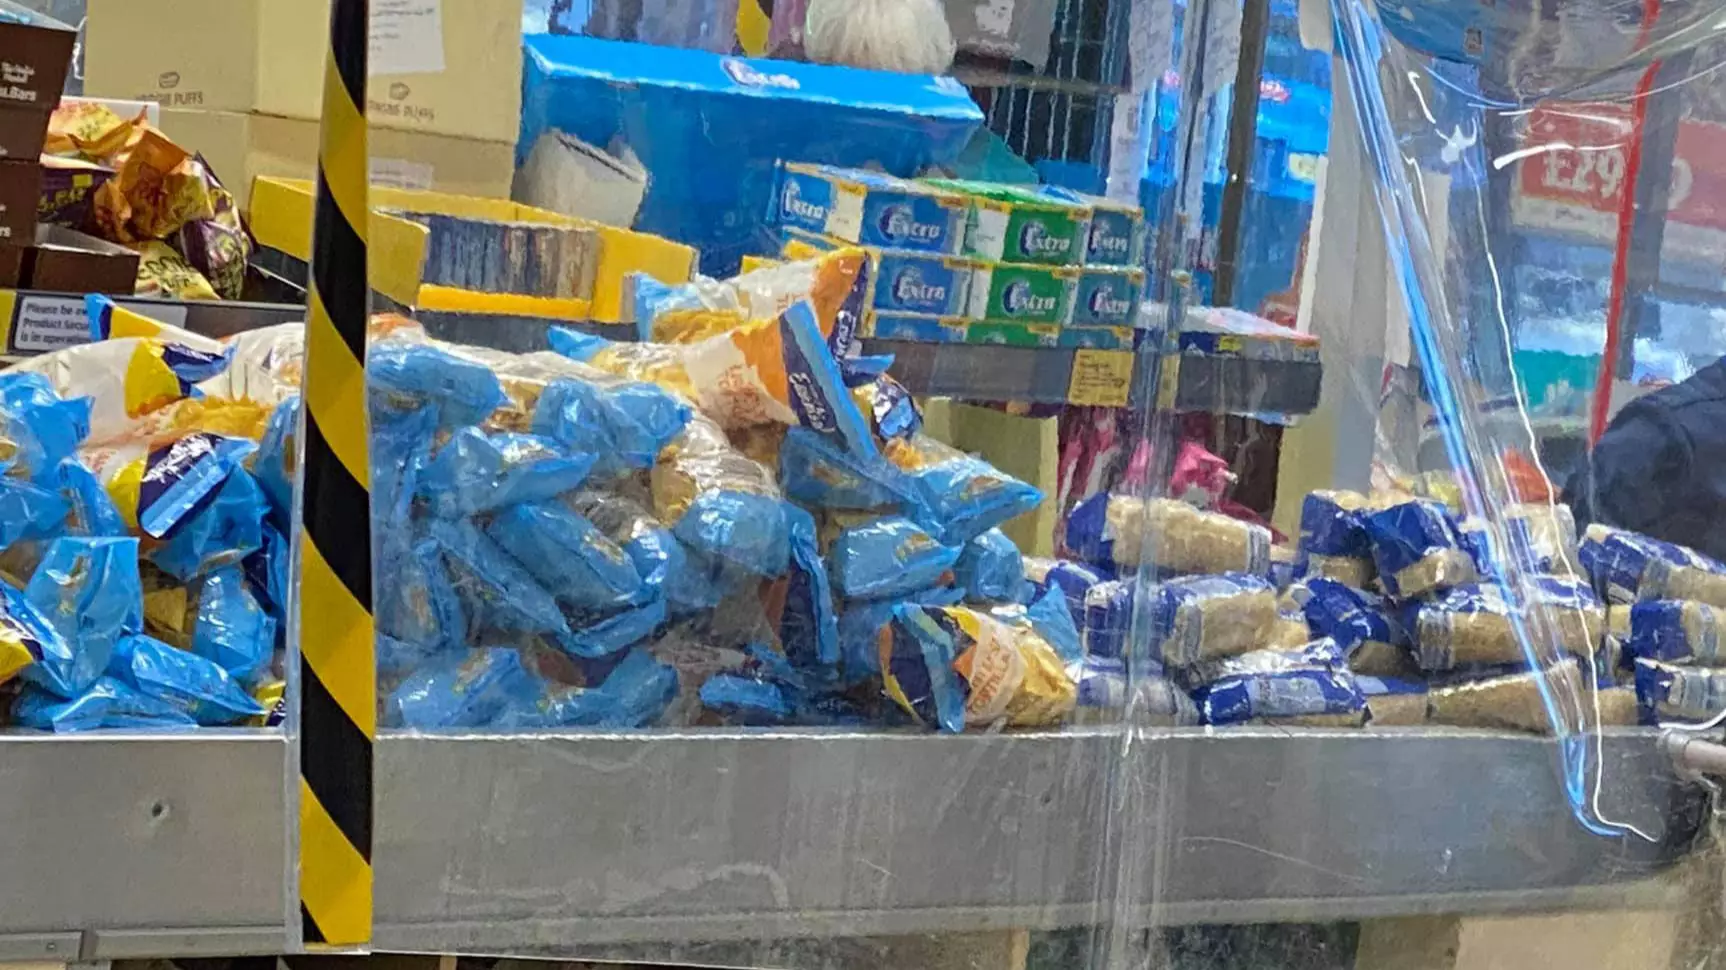 Man Spotted Loading Up On Rice, Pasta And Crisps At Aldi